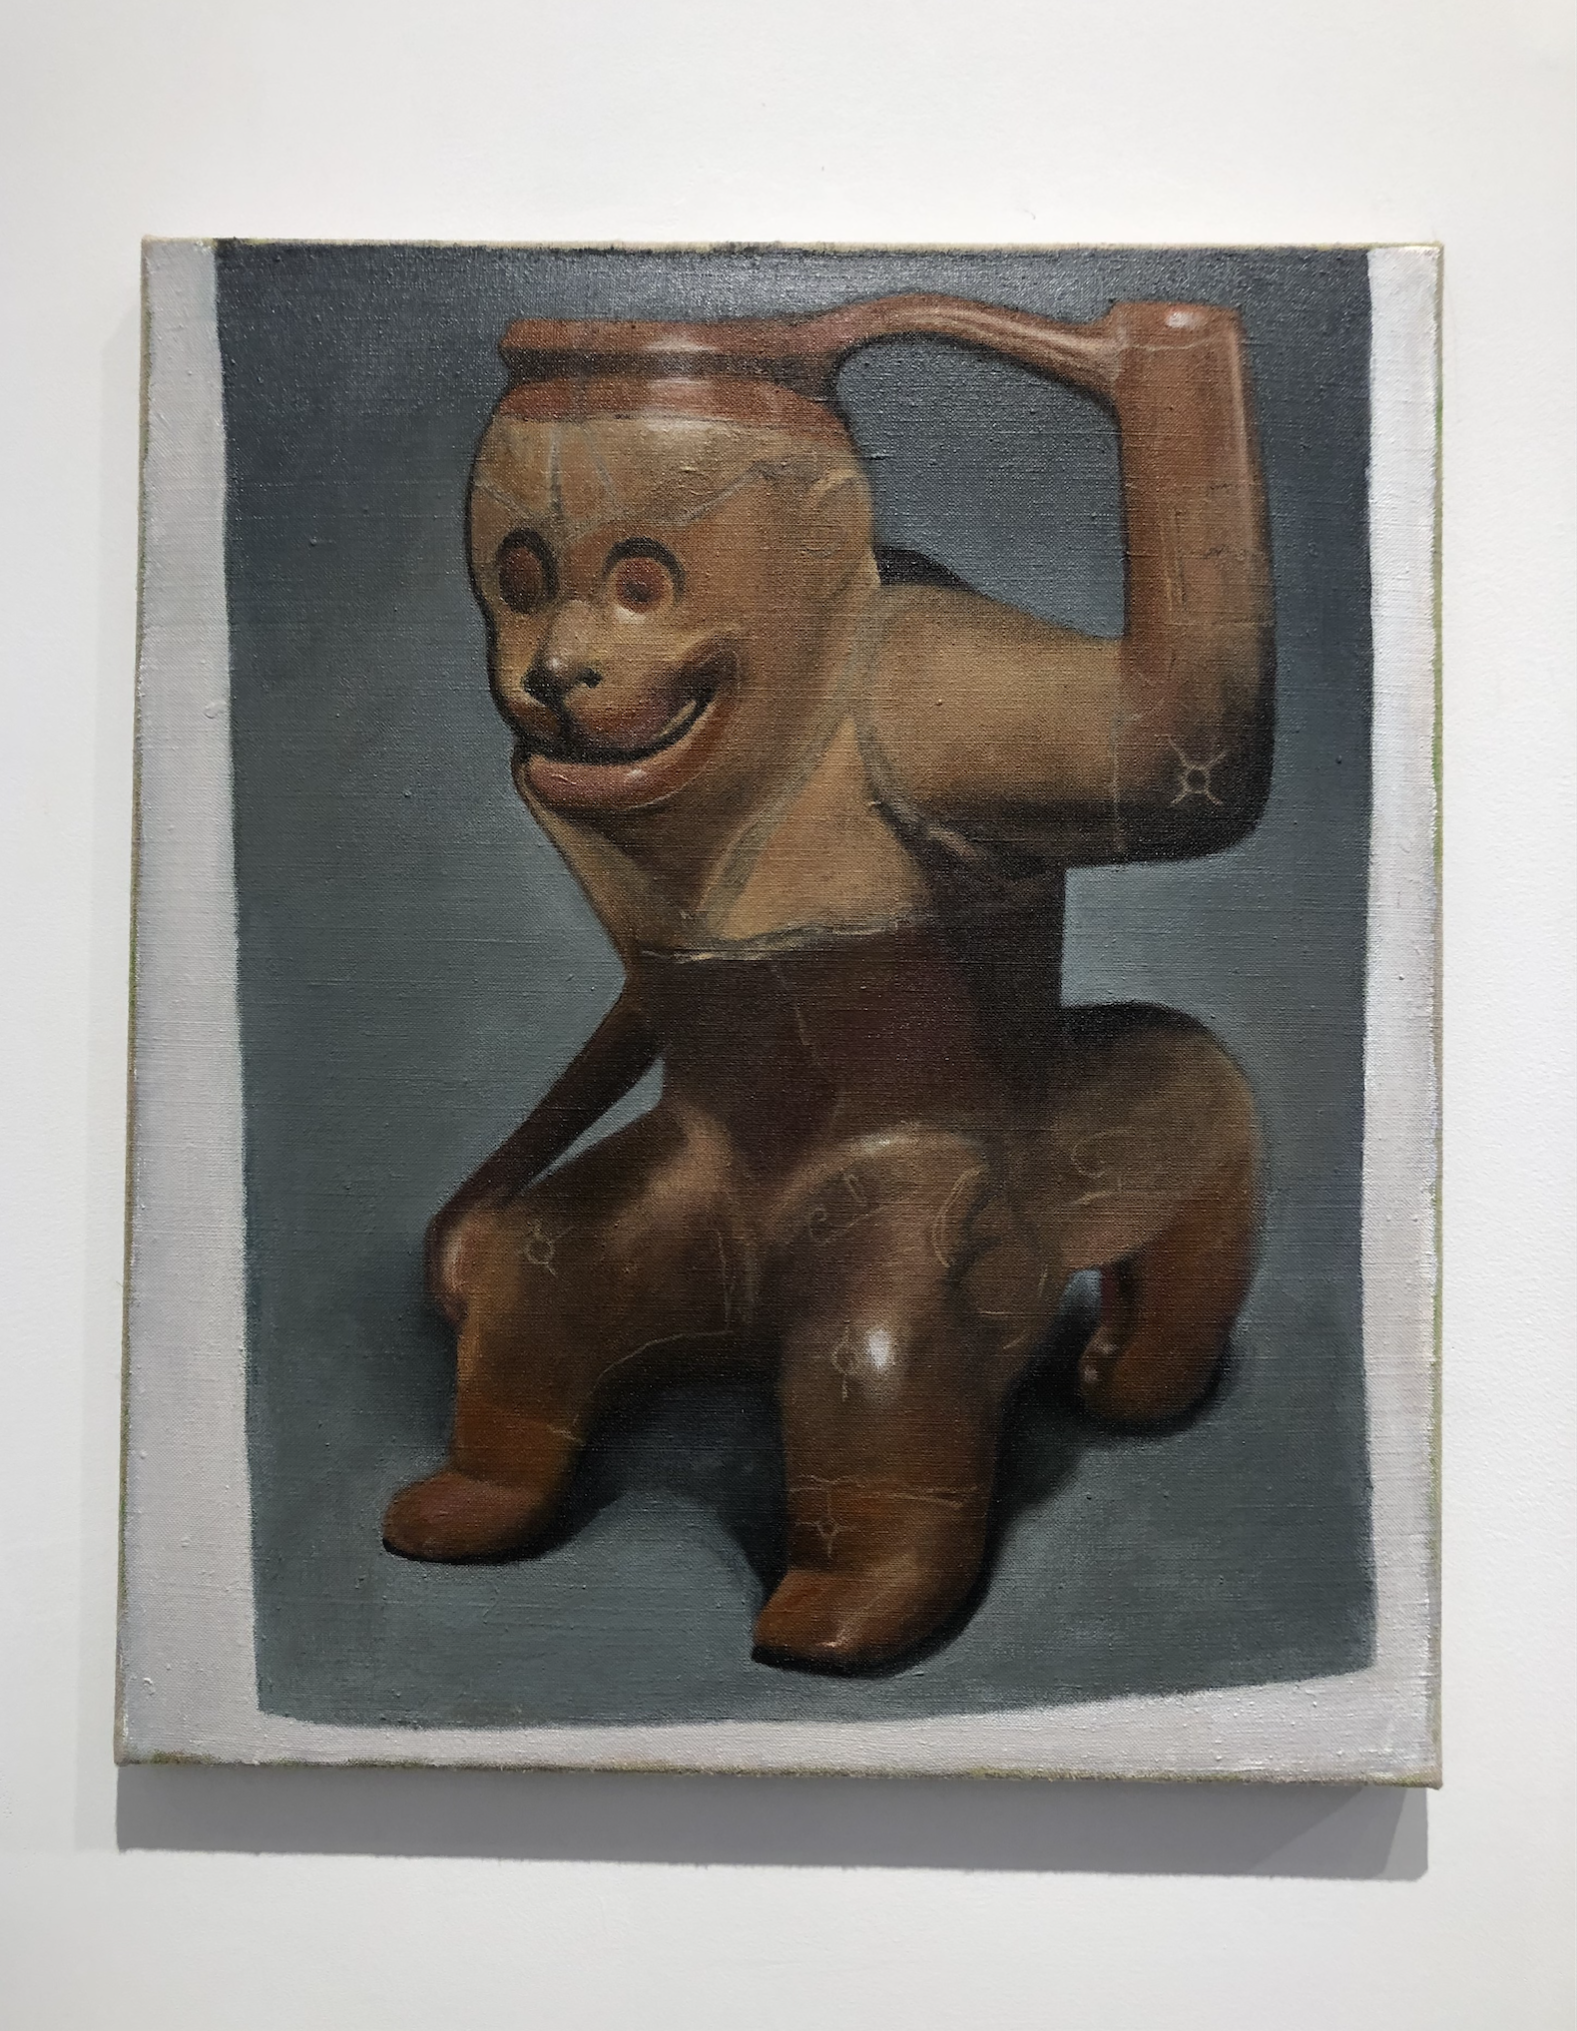 Painting of a page from an archaeology book of Costa Rican ceramics. Depicting a monkey photographed in a studio display.